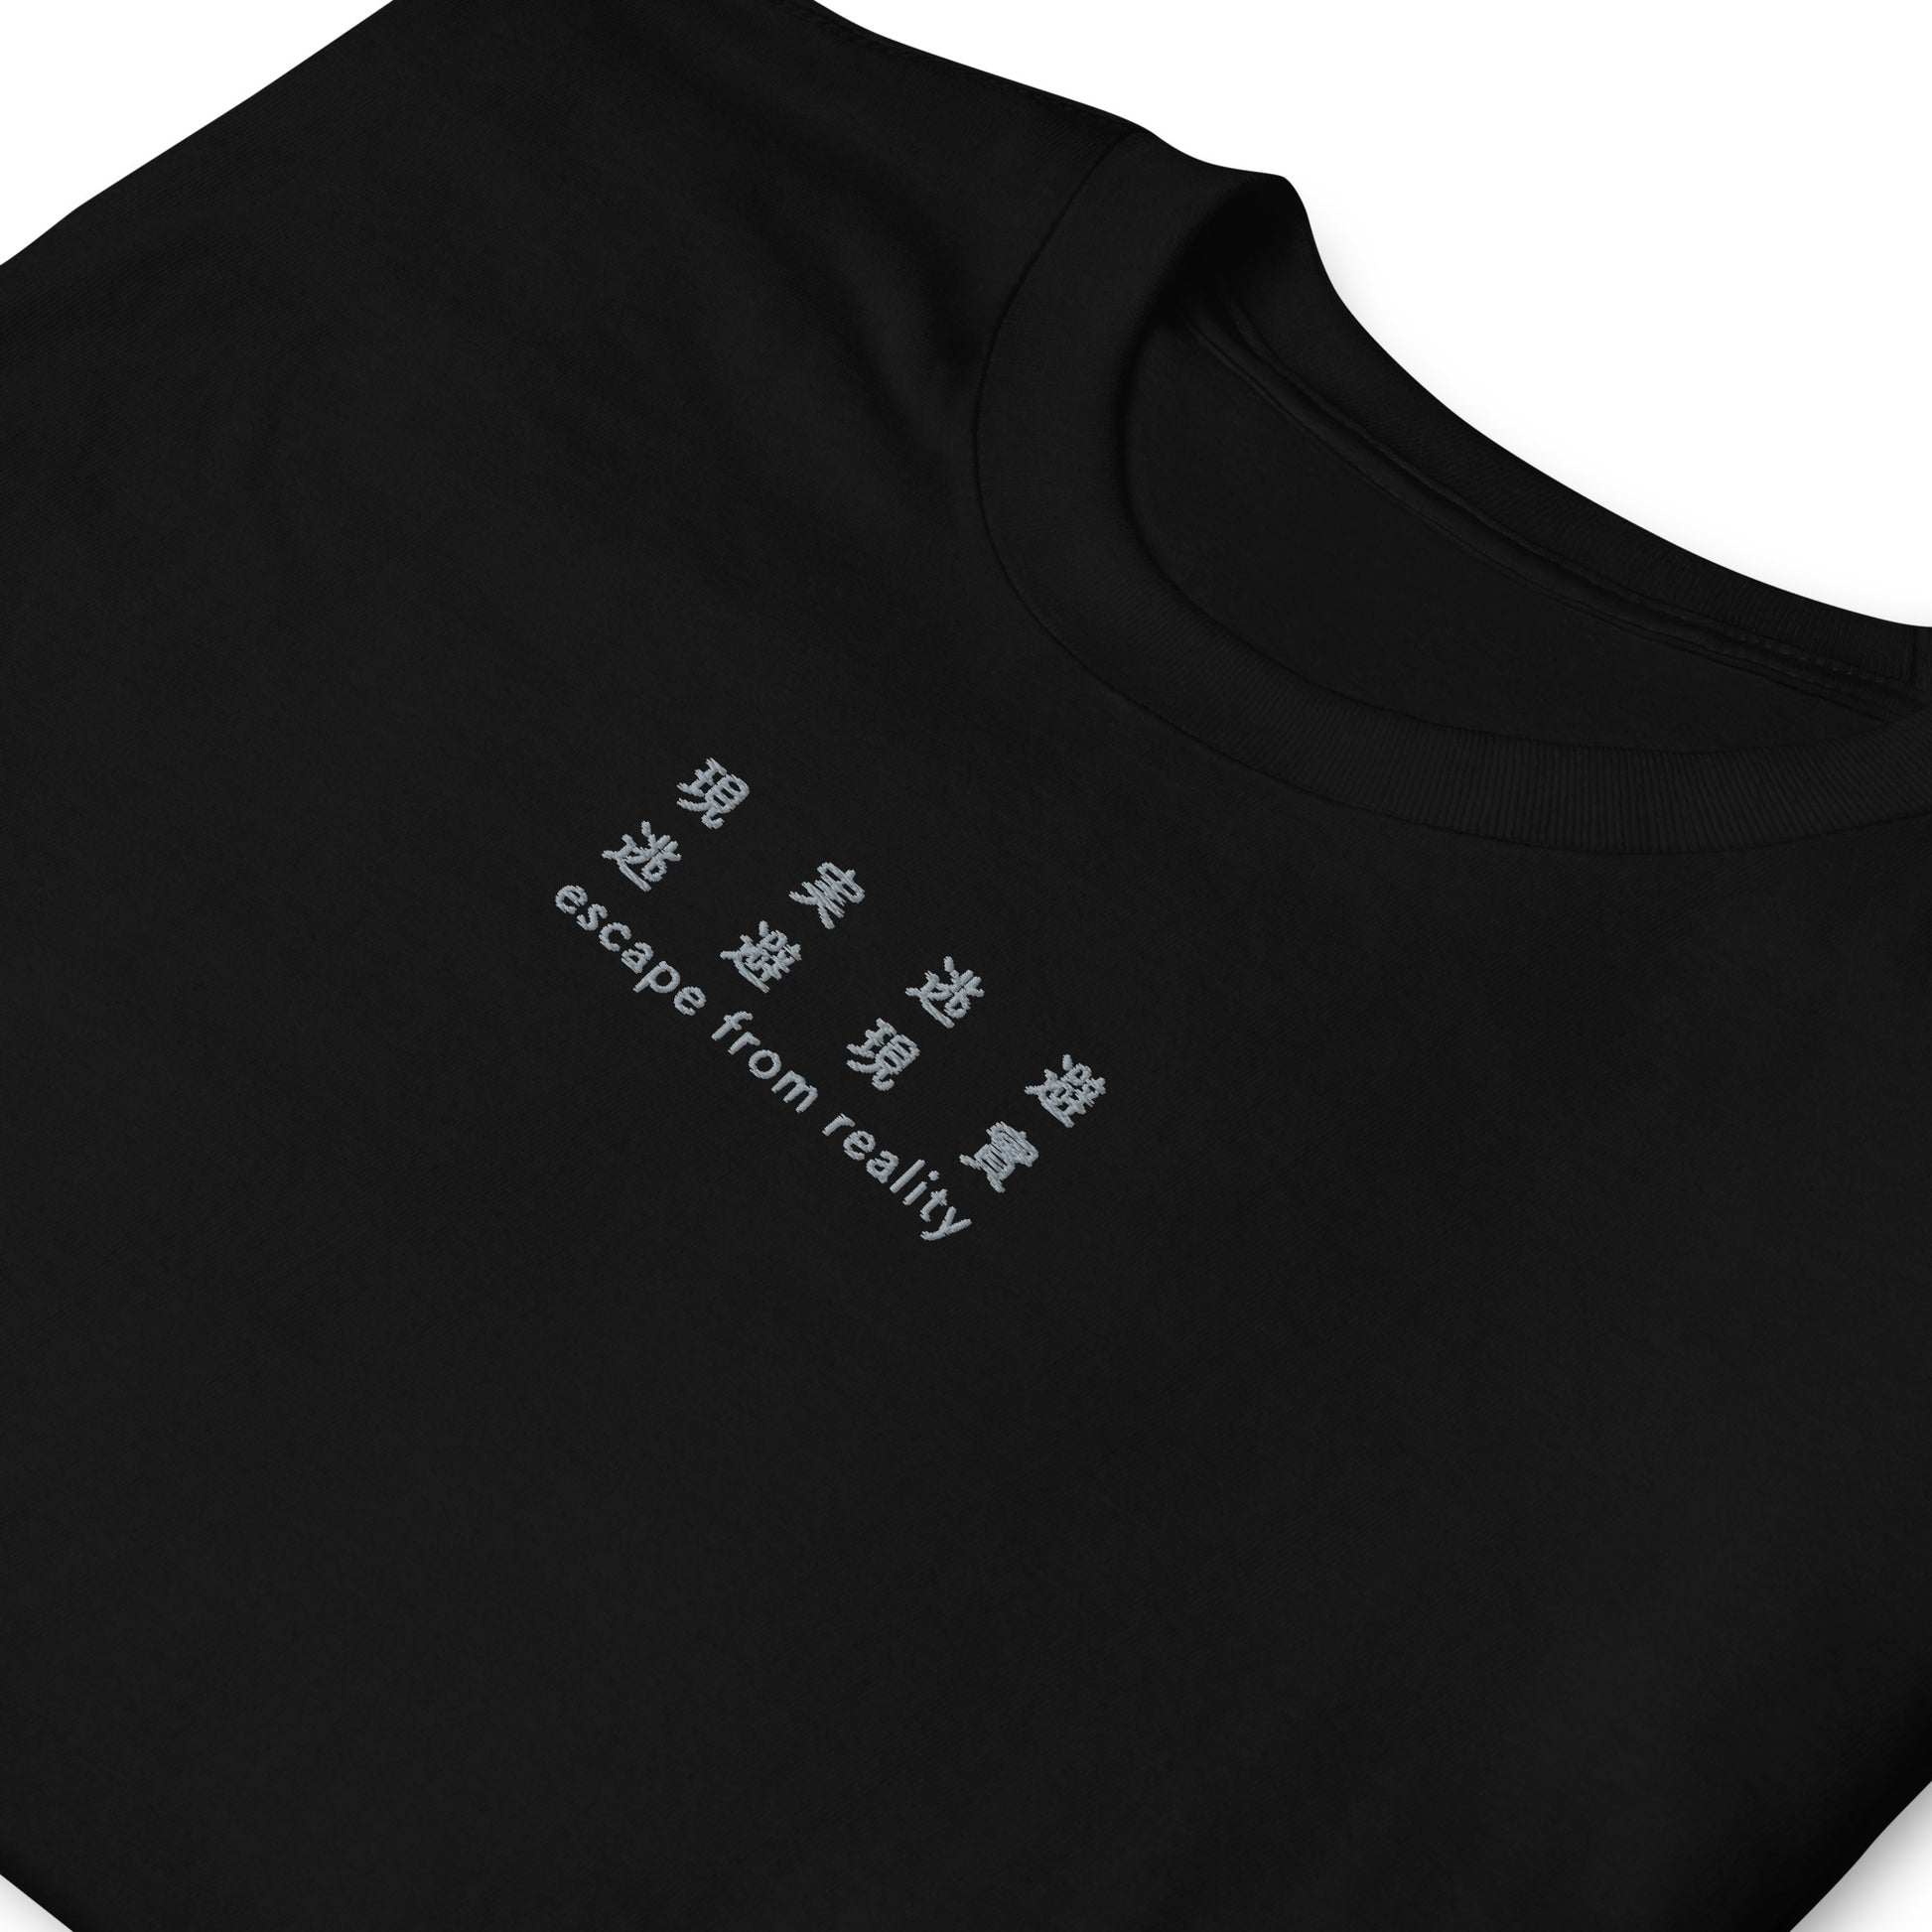 Black High Quality Tee - Front Design with an Light Gray Embroidery "Escape From Reality" in Japanese,Chinese and English